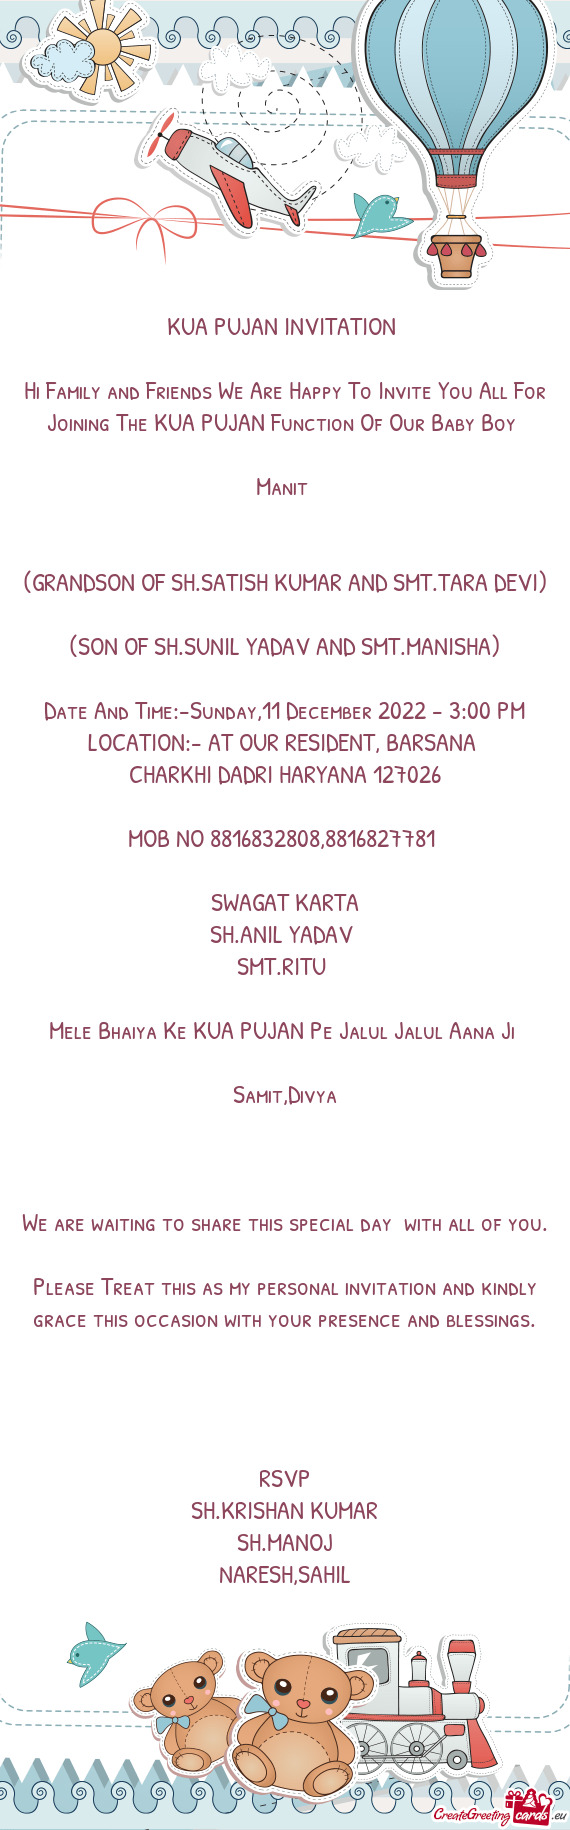 Hi Family and Friends We Are Happy To Invite You All For Joining The KUA PUJAN Function Of Our Baby